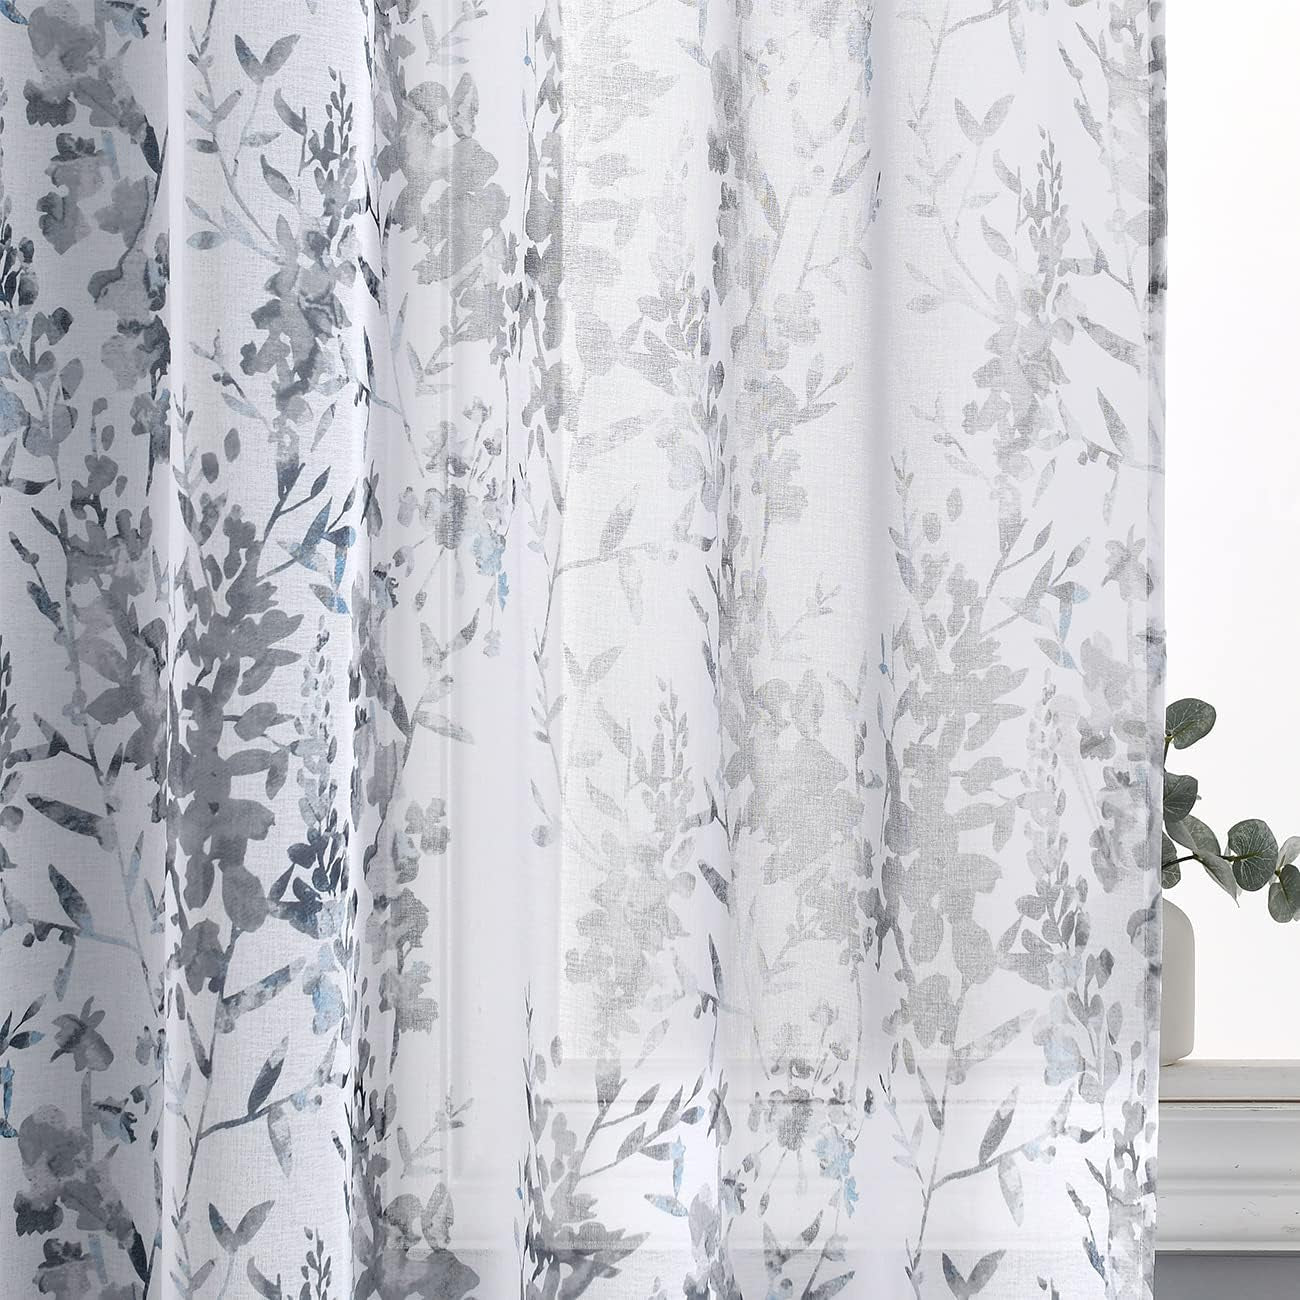 Kotile Purple White Sheer Curtains, Country Branch Leaf Print Sheer Curtains 63 Inch Length for Bedroom, Rod Pocket Privacy Floral Sheer Window Curtains, 50 X 63 Inch, 2 Panels, Purple  Kotile Textile Grey W50 X L84 Inch 